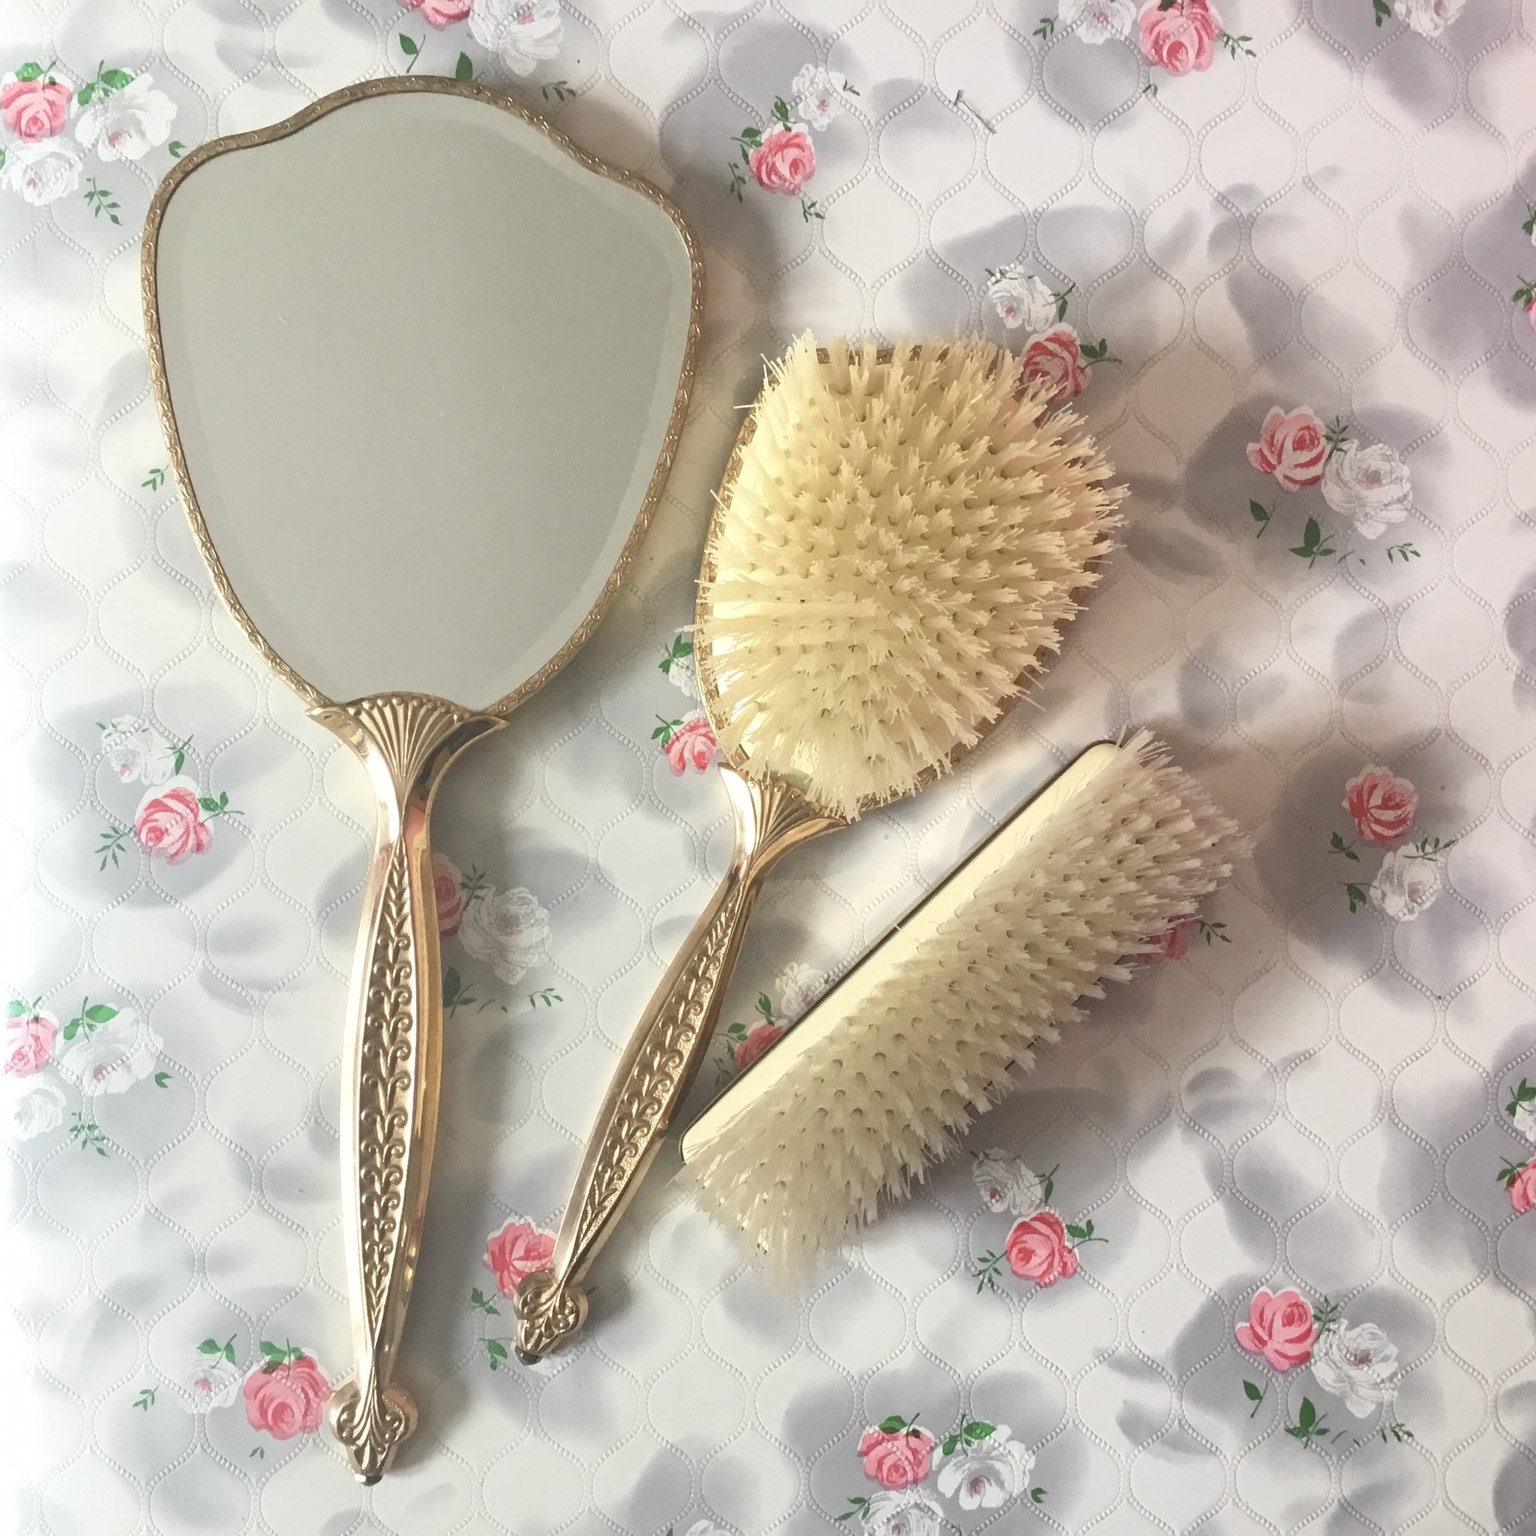 Lissco dresser set with hand mirror, hairbrush and clothes brush, with ...